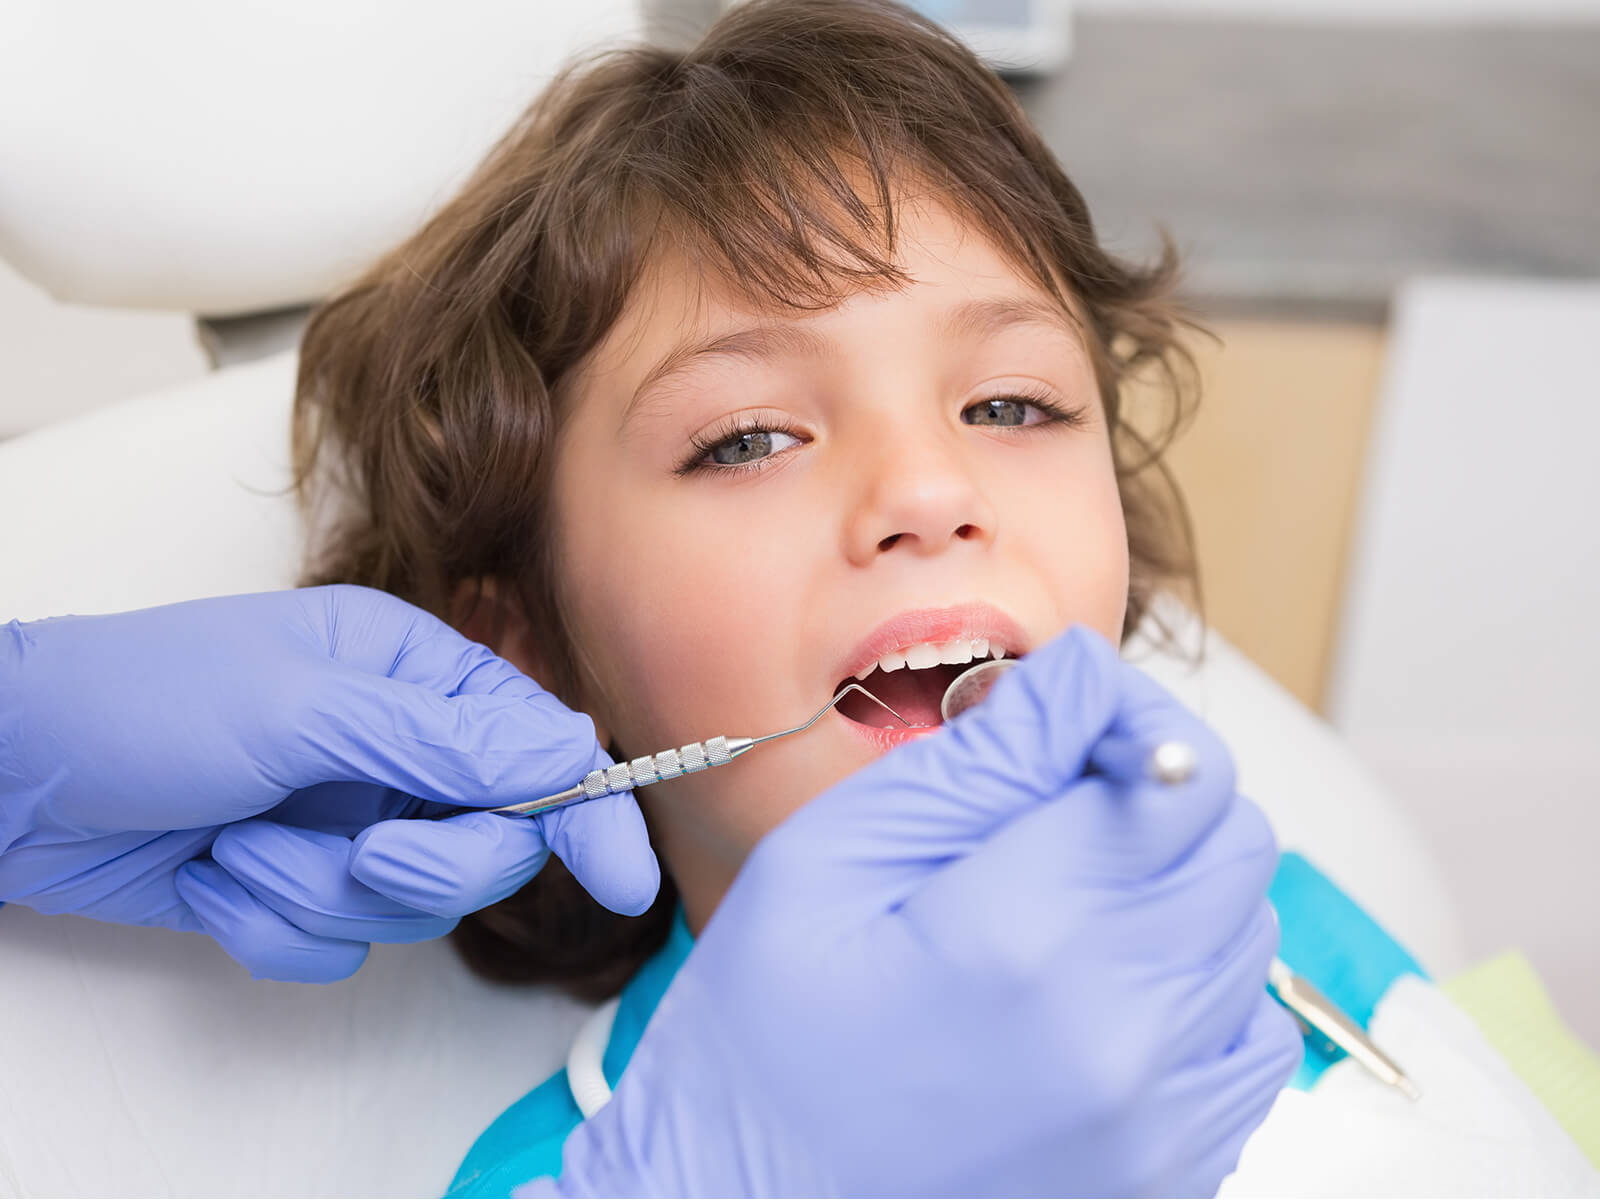 How Can I Prepare My Child For Oral Surgery?